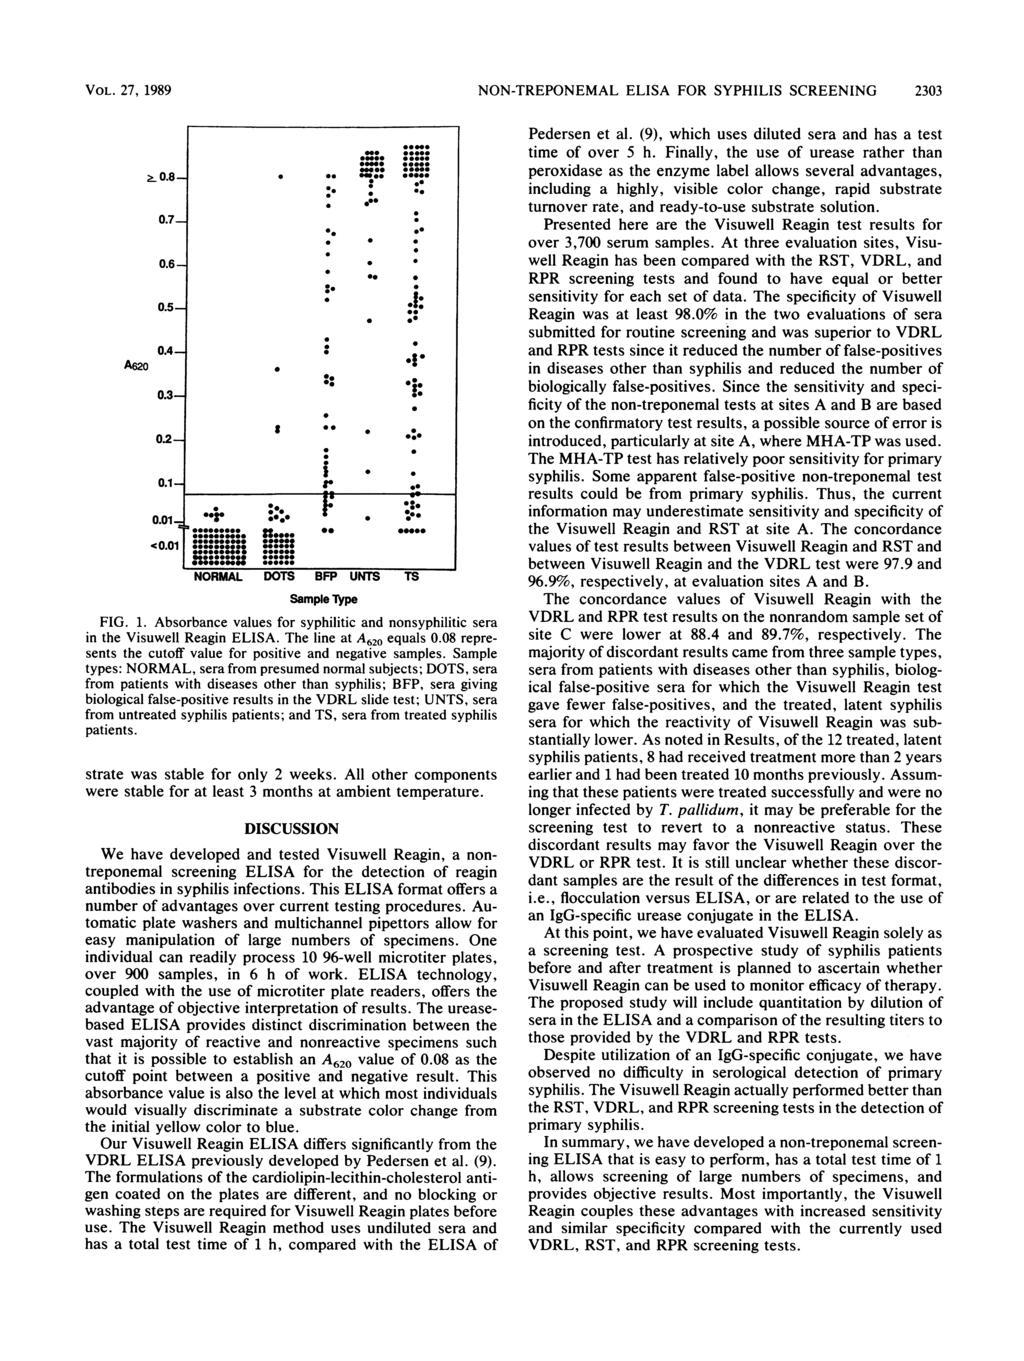 VOL. VOL. 27, 27, 1989 1989~~~~NON-TREPONEMALELISA FOR SYPHILIS SCREENING 20 2303 NORUIMAL EDOTS UNTmS TS Sample Type FIG. 1. Absorbance values for syphilitic and nonsyphilitic sera in the Visuwell Reagin ELISA.